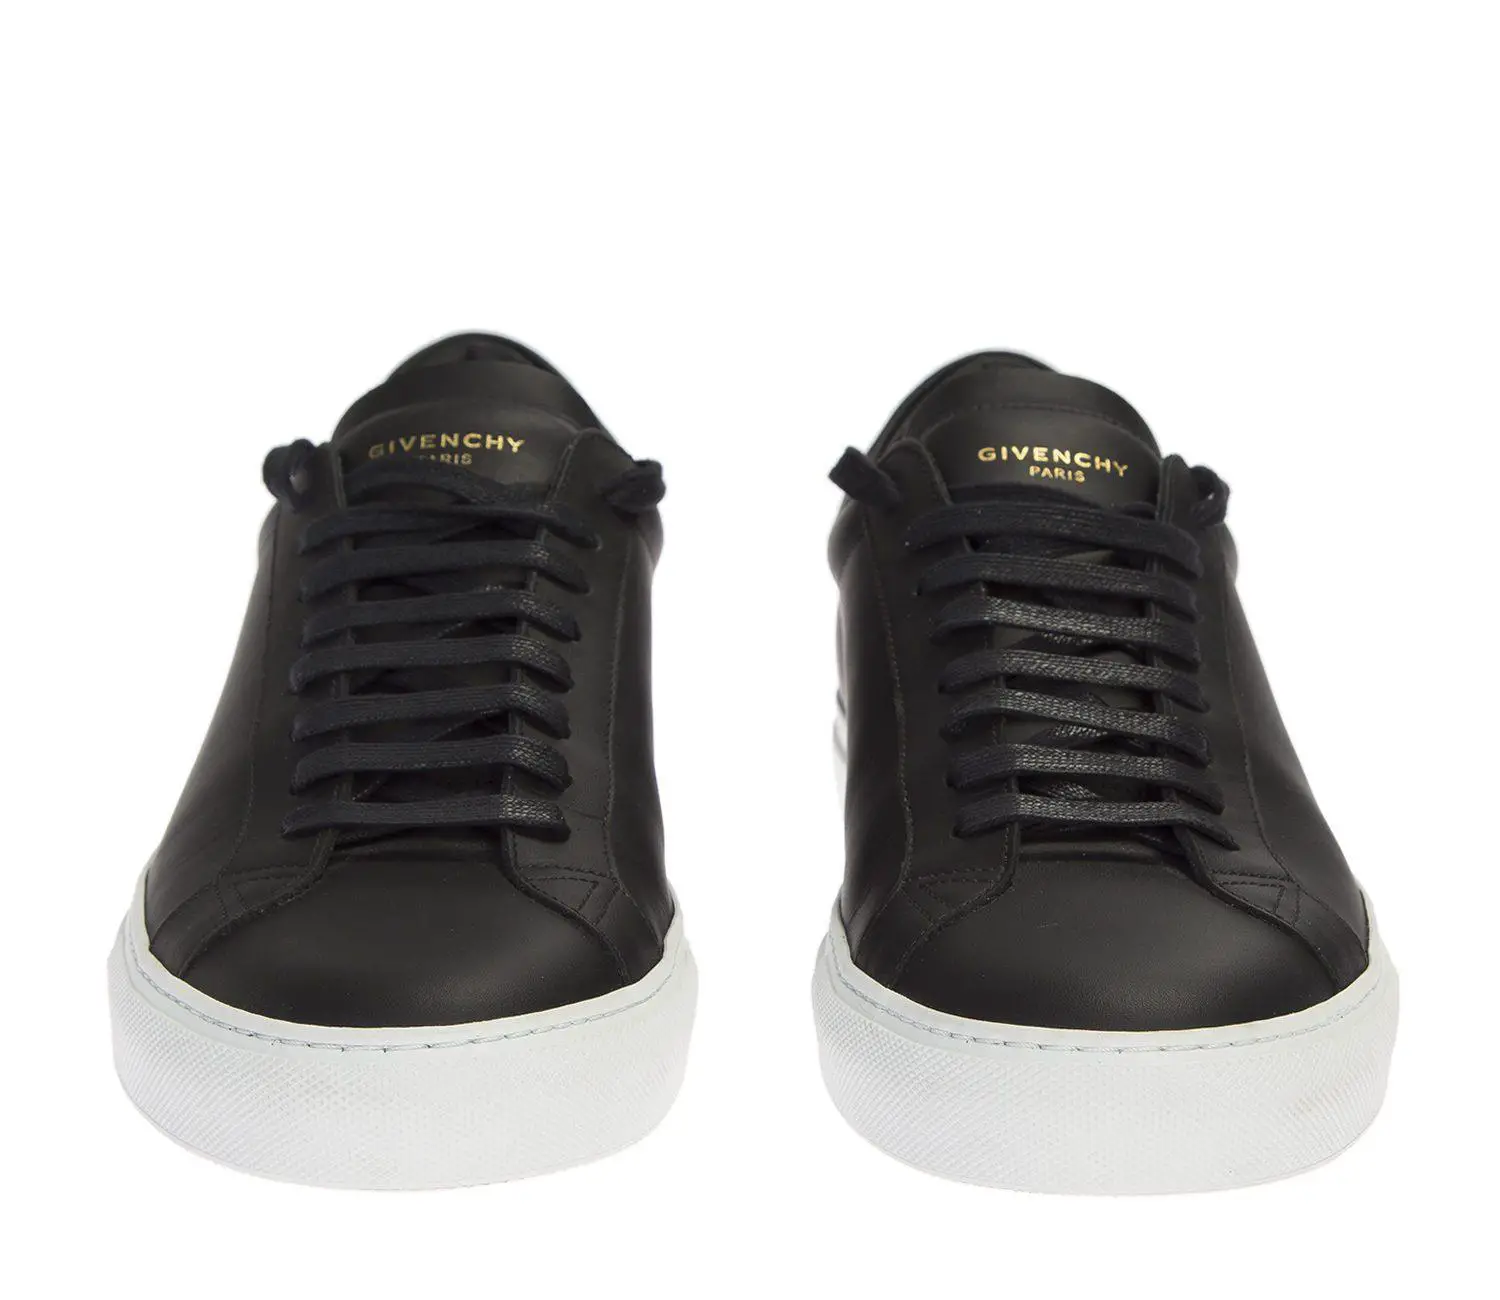 Givenchy Black Leather Sneakers With White Soles for Men